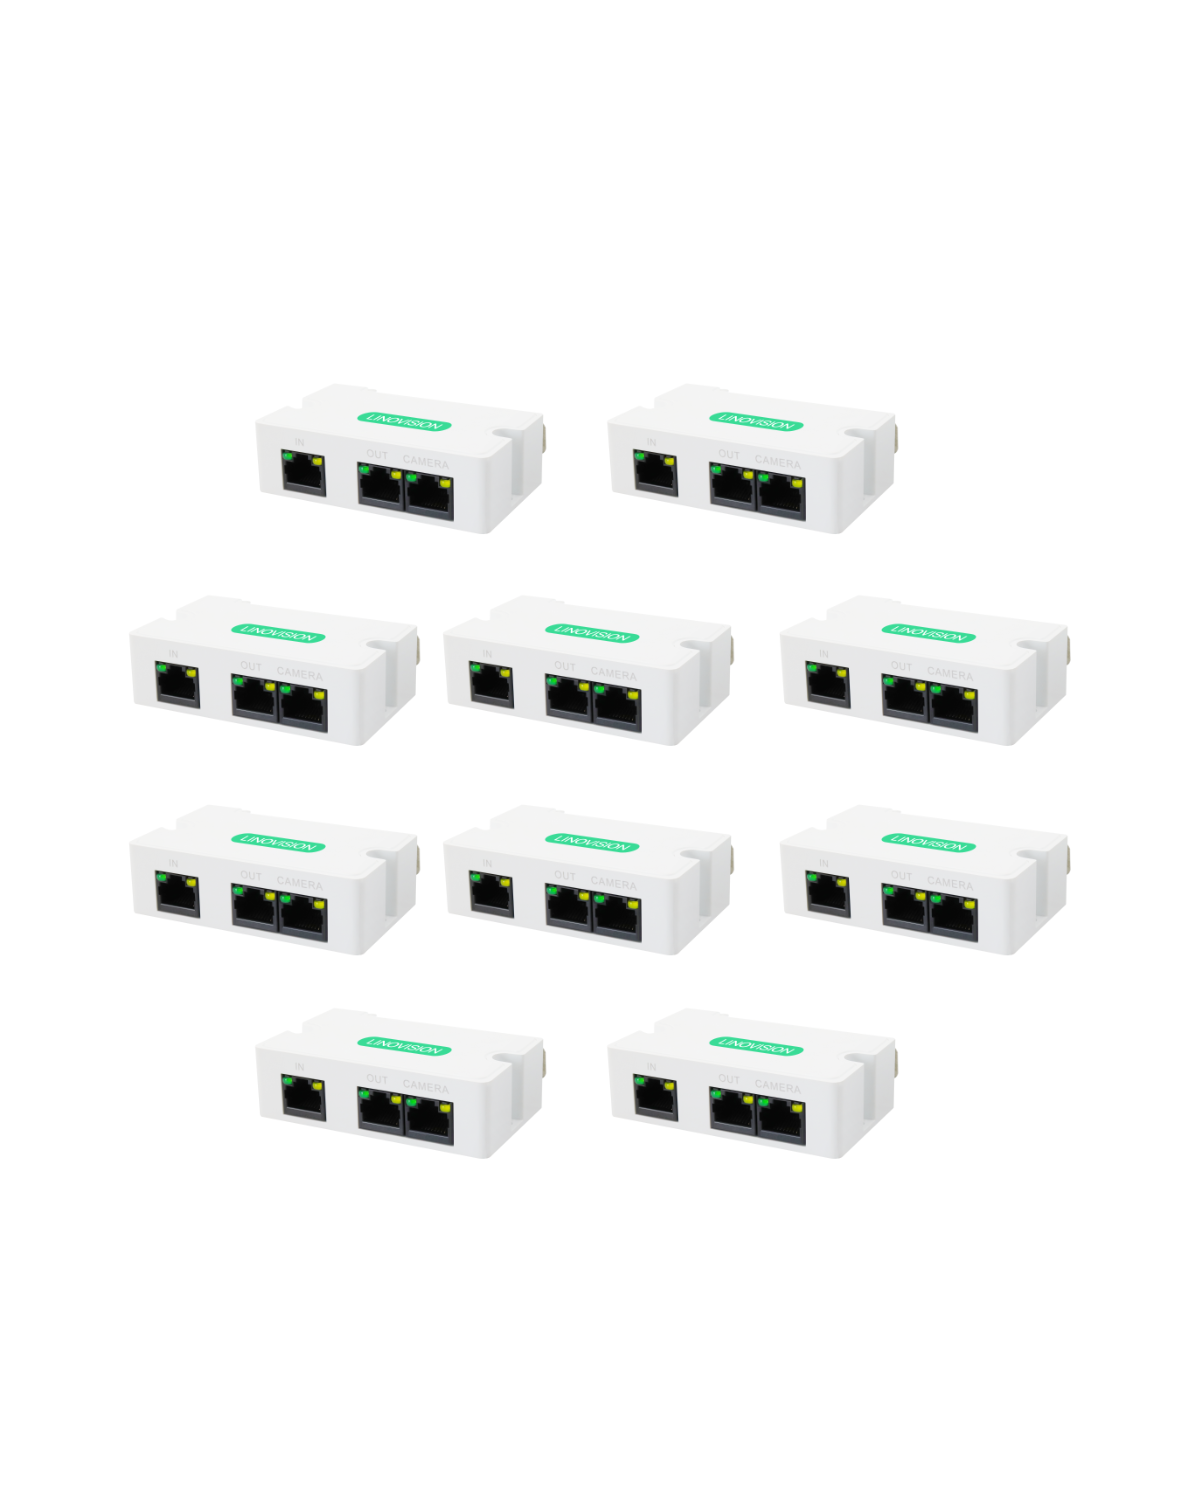 Mini 2-Port PoE Extender to Split One PoE cable for Two PoE devices 10pack